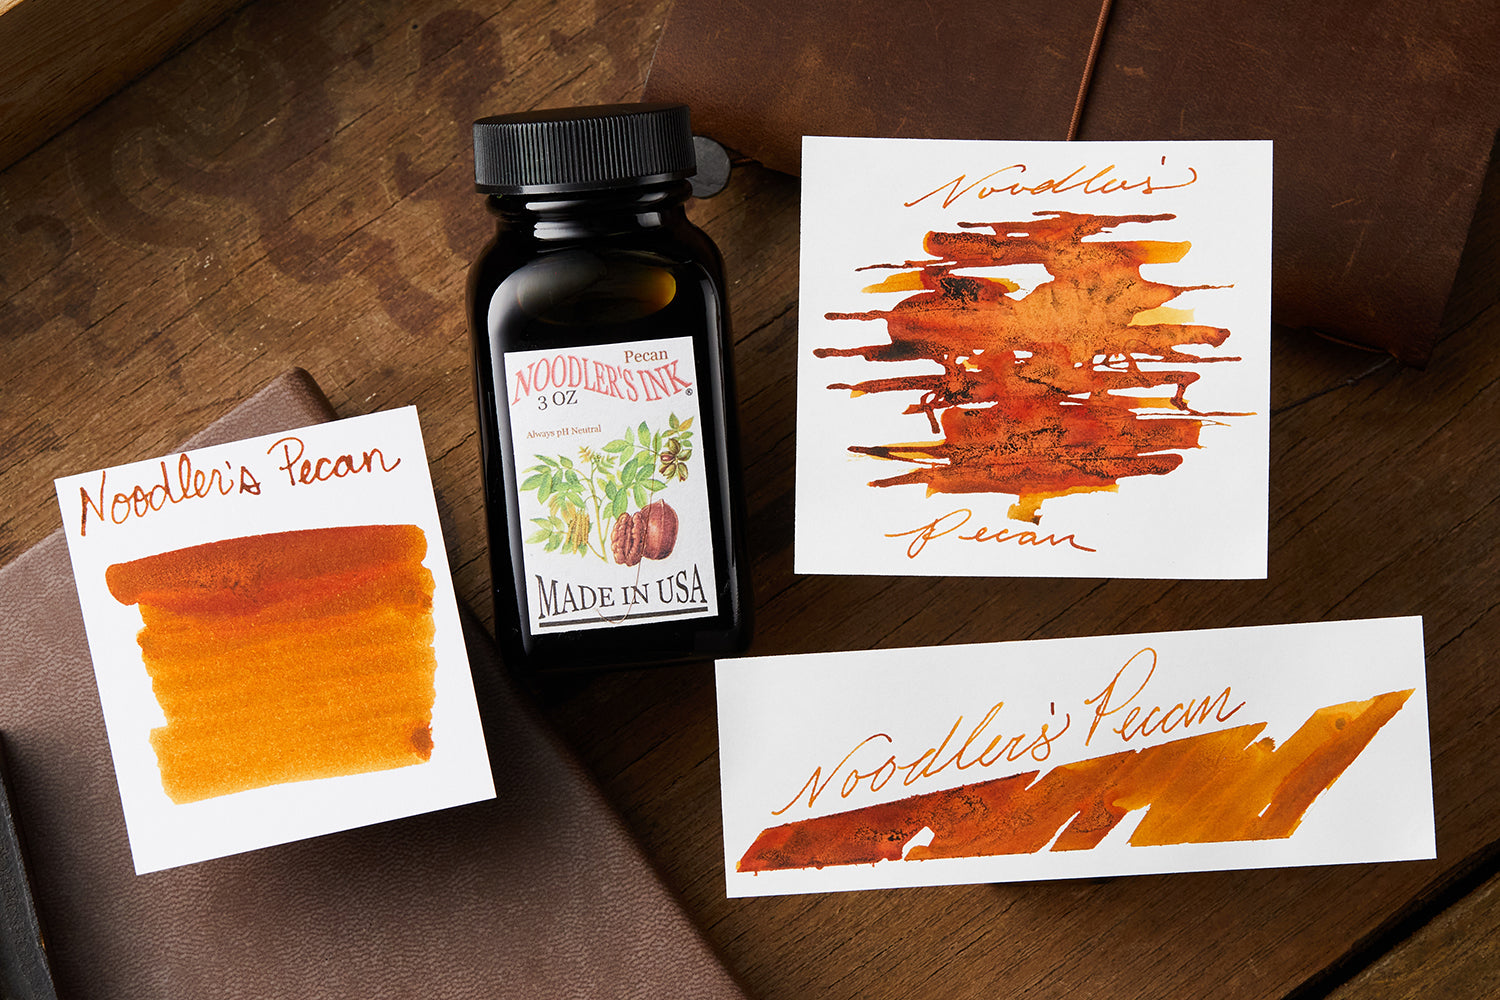 Noodler's Pecan ink on various papers